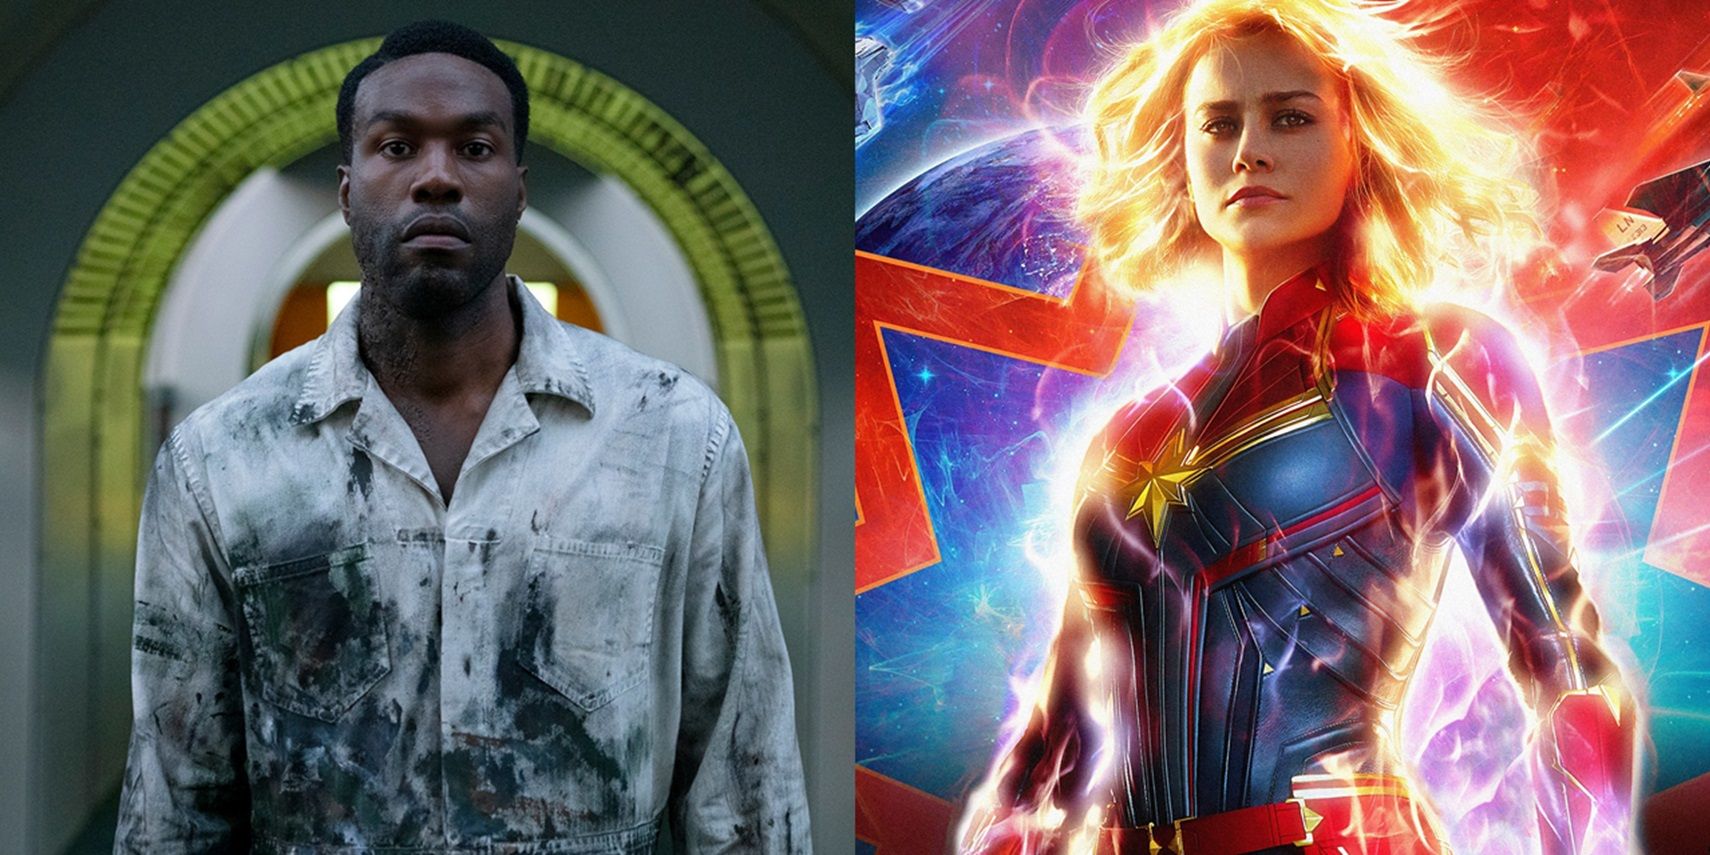 Anthony in Candyman and Brie Larson on the Captain Marvel poster